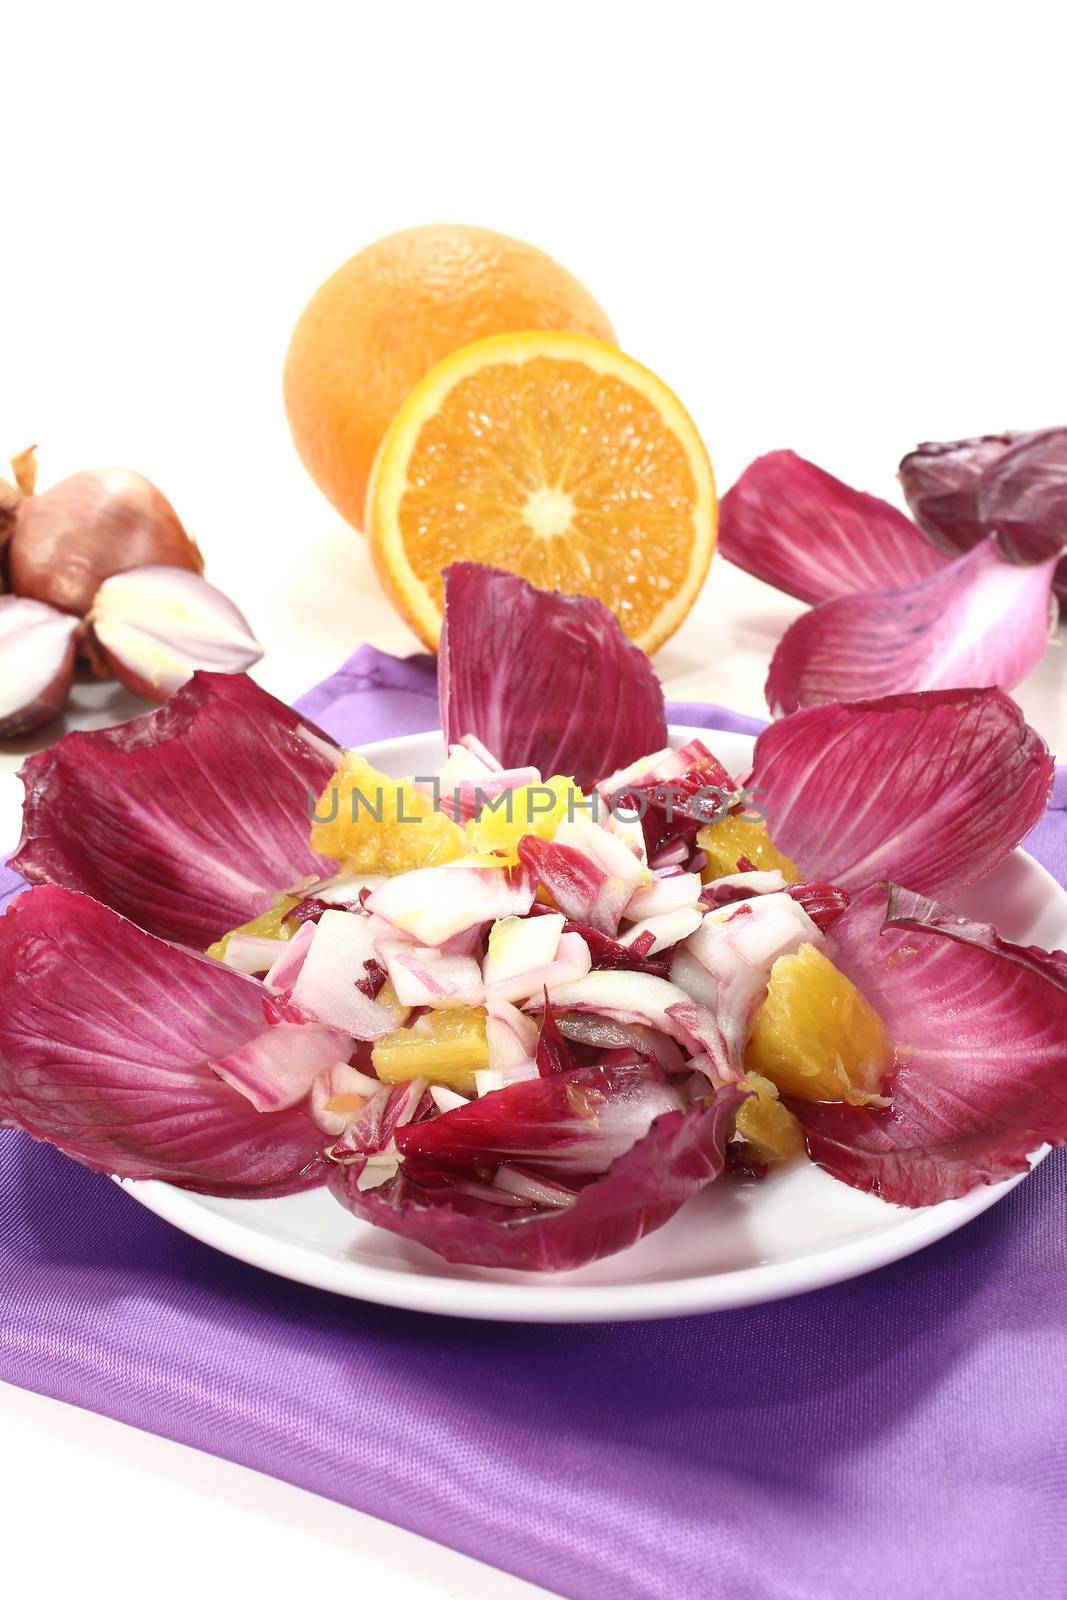 red chicory salad with orange slices and dressing